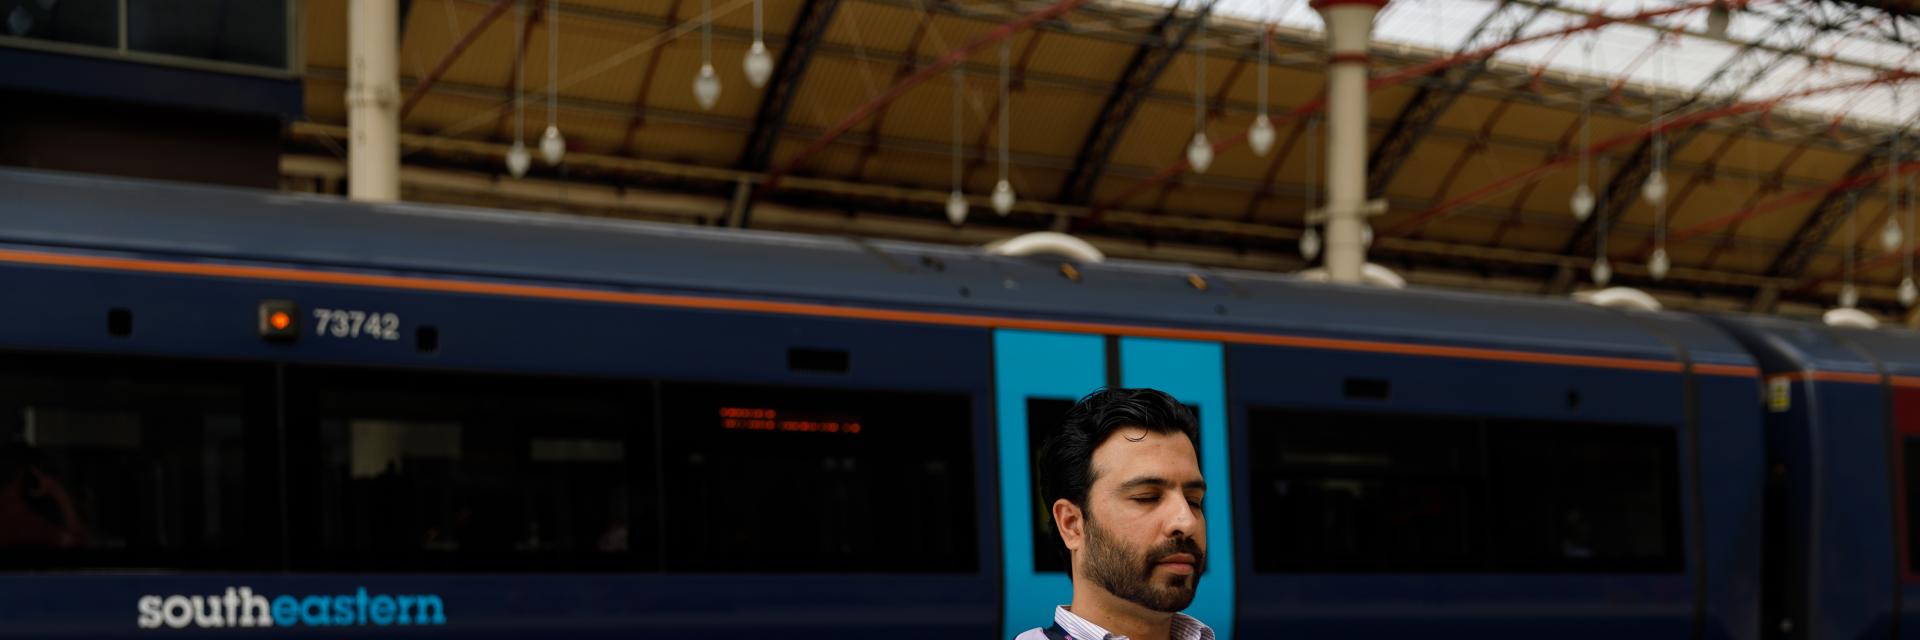 Rail worker sat on a seat at a station, meditating